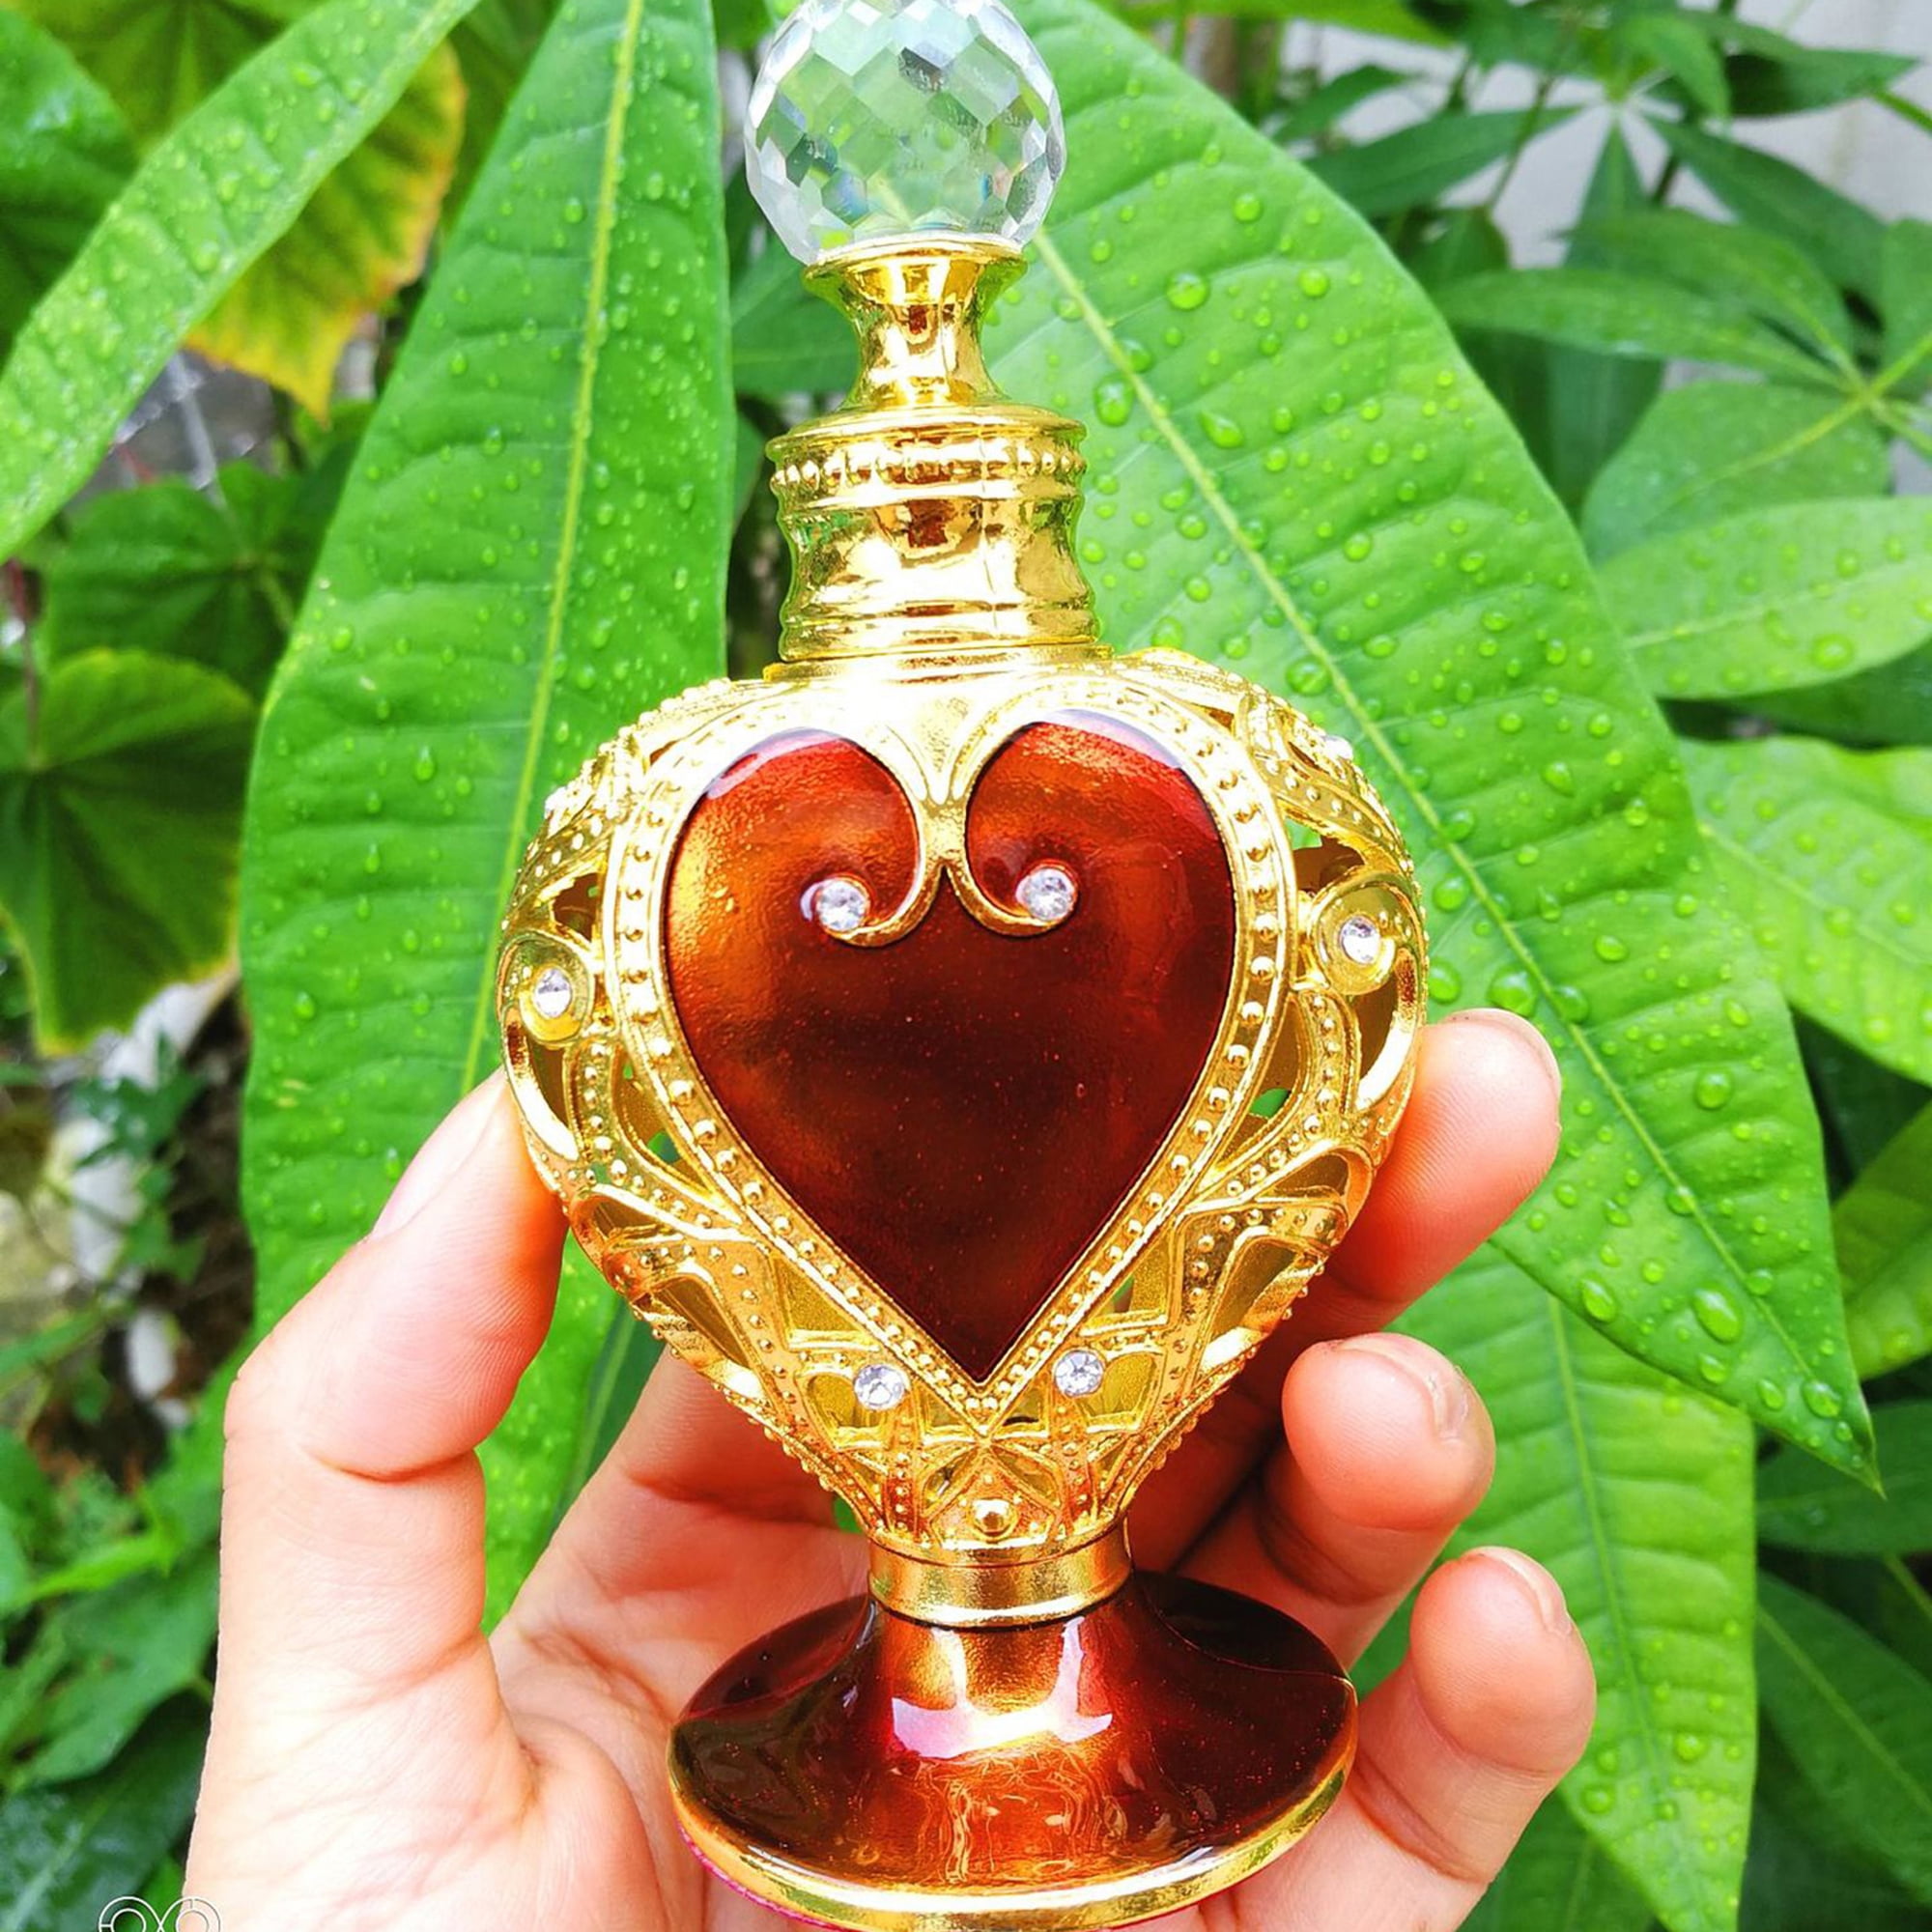 Perfume Bottle, Vintage Perfume Bottles with Heart Design with Decorative  Jewelry for Perfume 